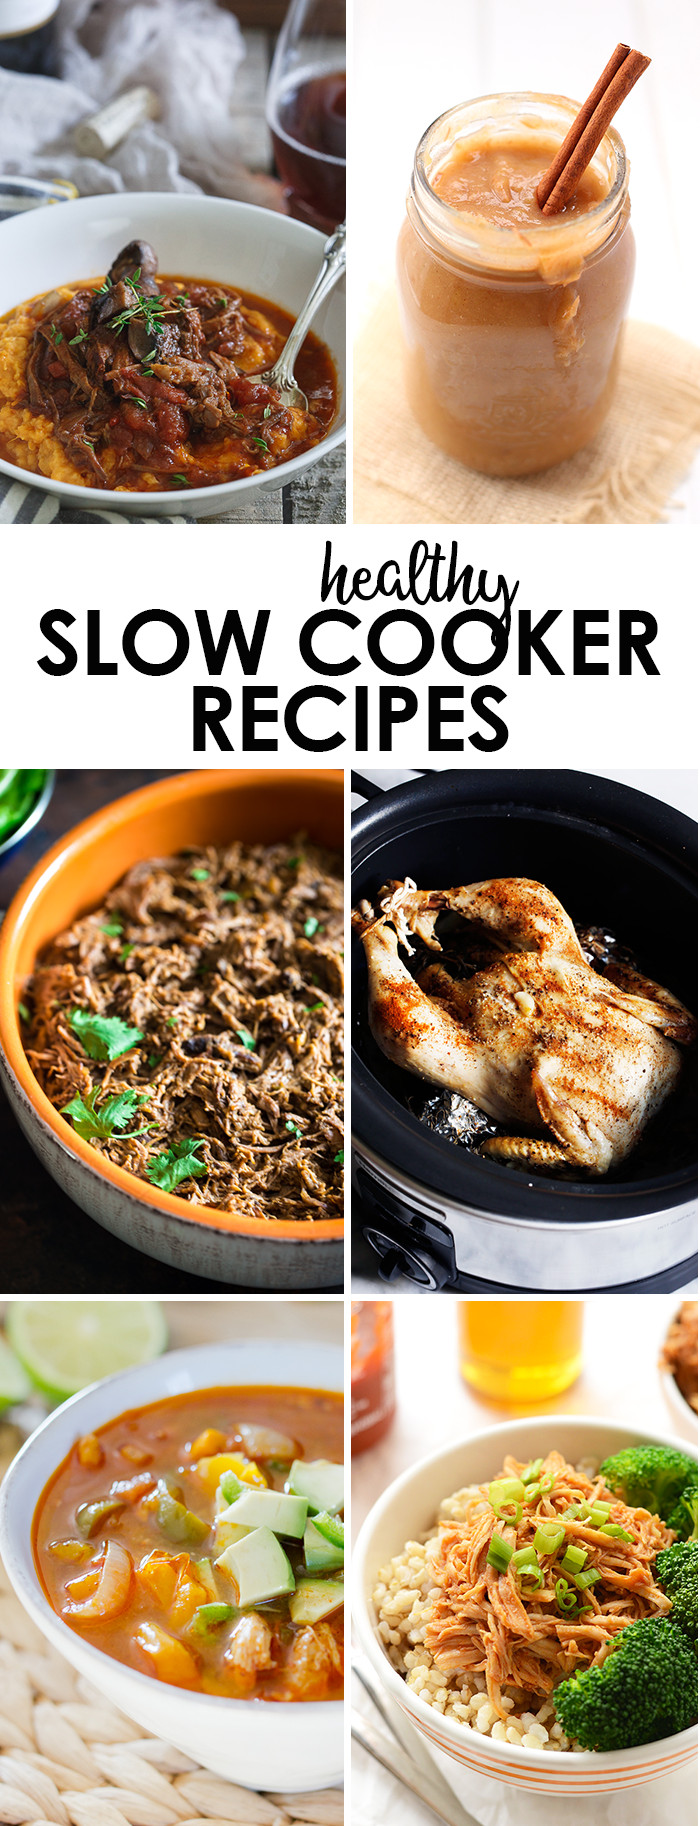 Slow Cooker Recipes Healthy
 5 Ingre nt Honey Sriracha Slow Cooker Chicken Fit